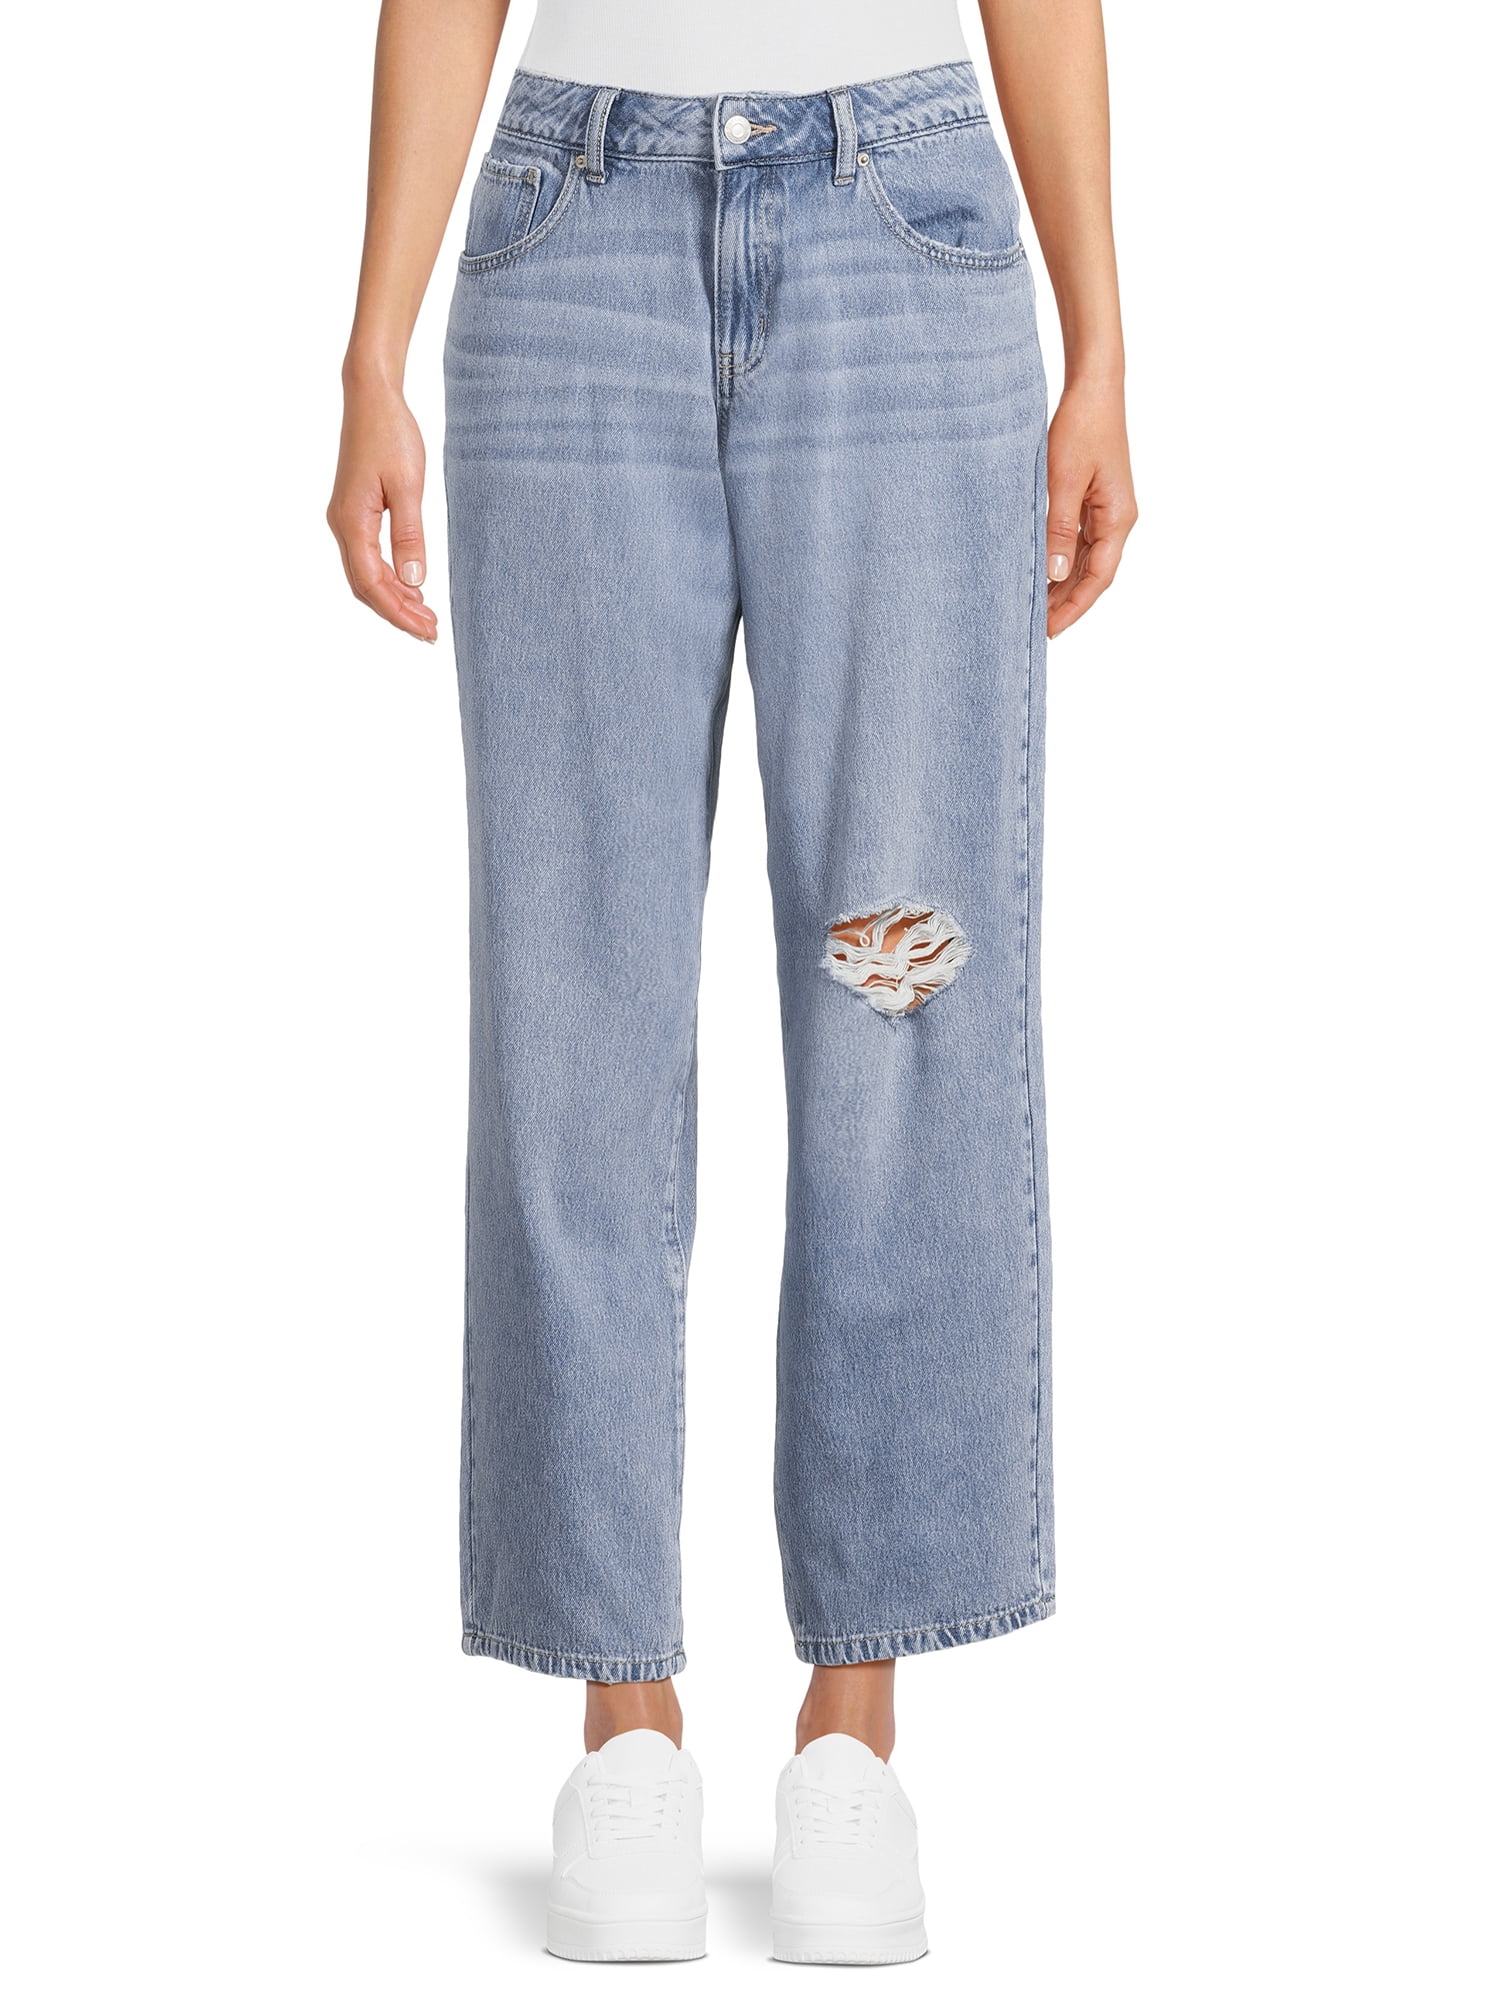 Time and Tru Women’s Low Rise Baggy Jeans, Sizes 2-20 - Walmart.com